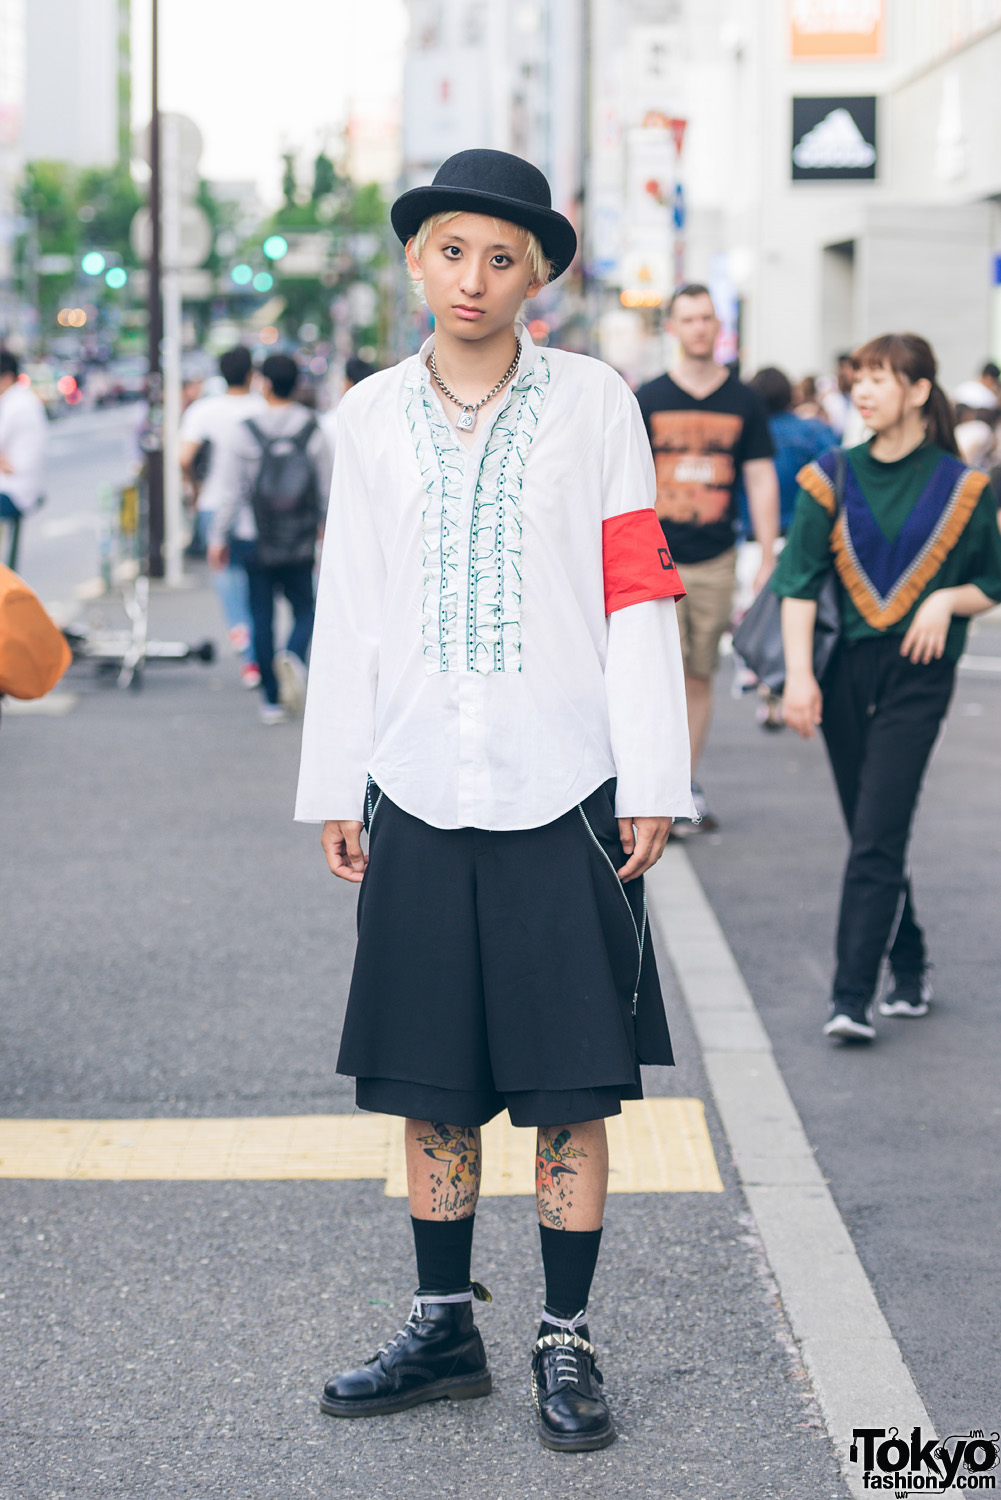 Punk Street Style w/ Ruffle Shirt, Comme des Garcons Skirt & Dr. Martens Ankle Boots